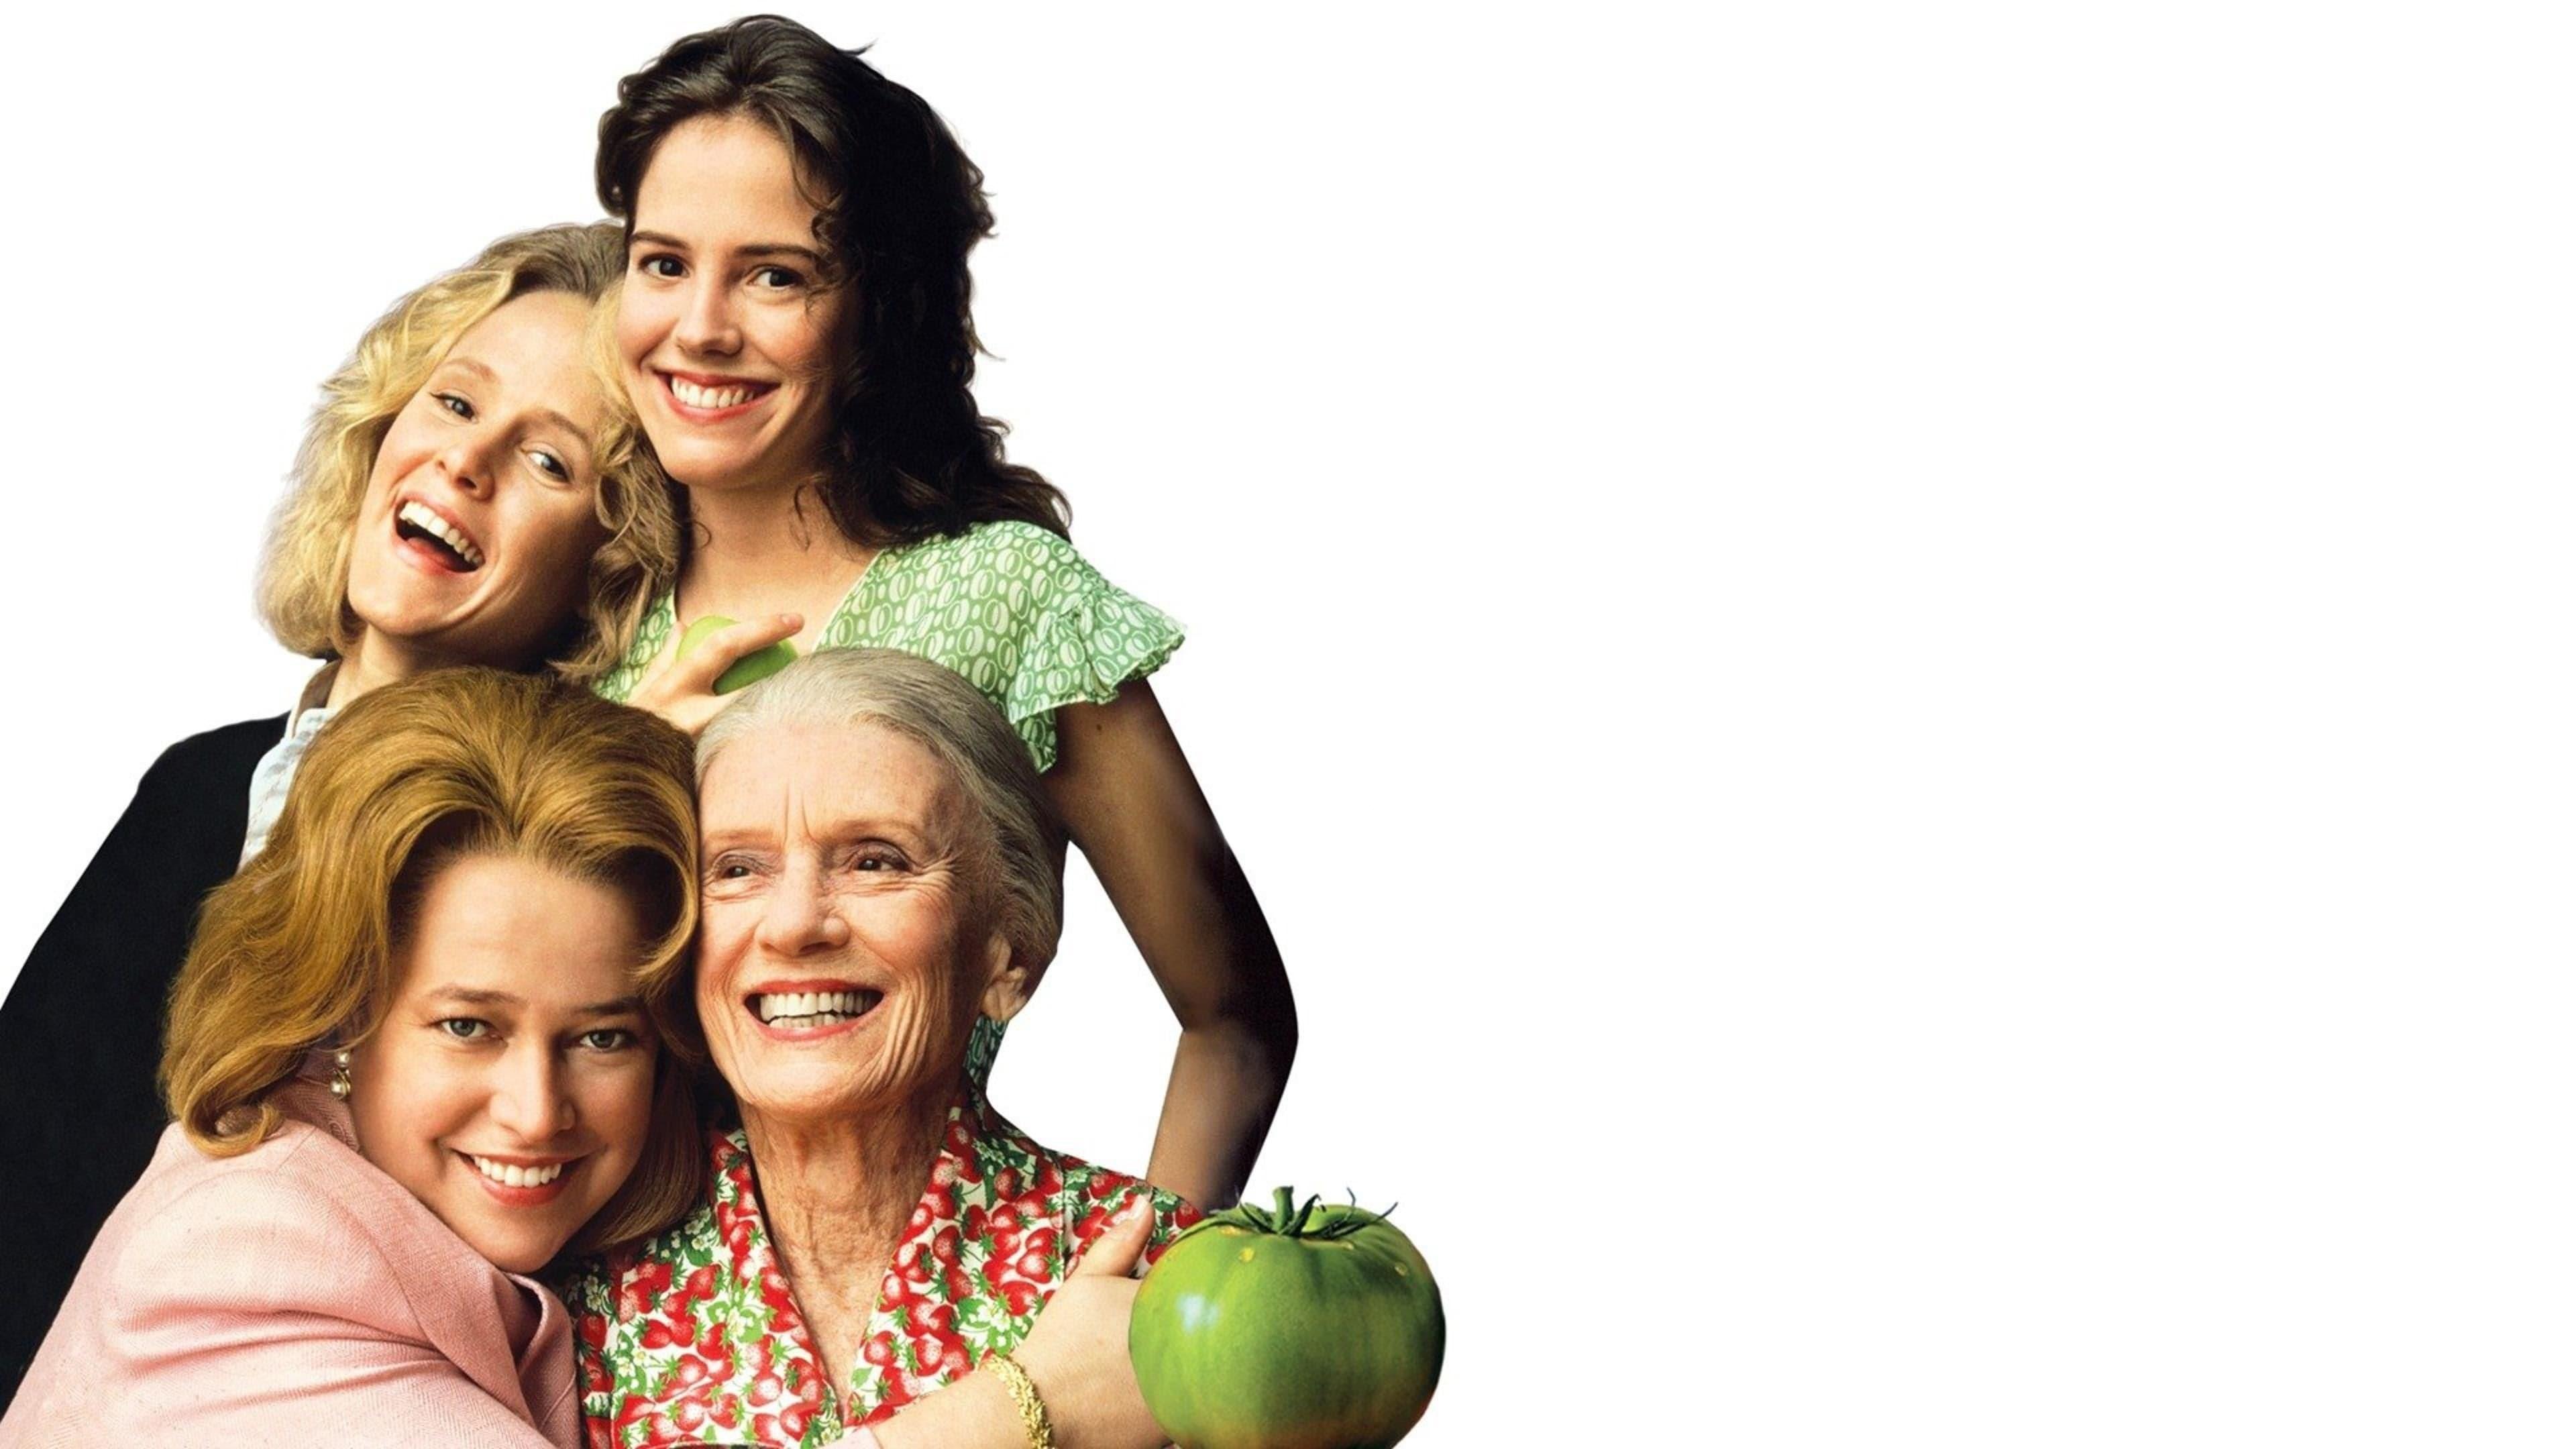 Fried Green Tomatoes backdrop